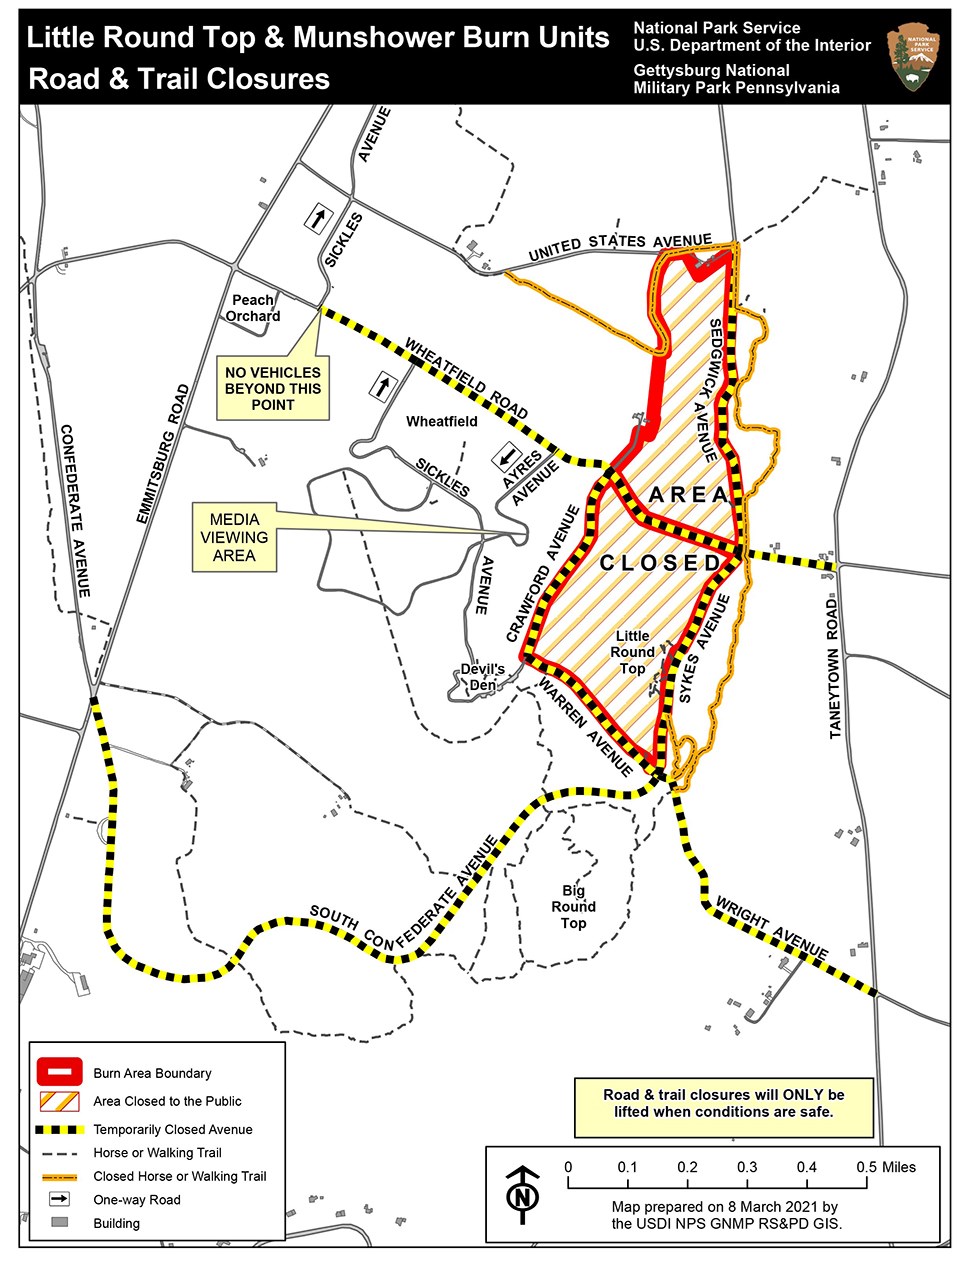 A map shows areas that are closed and road closures due to a scheduled prescribed fire.